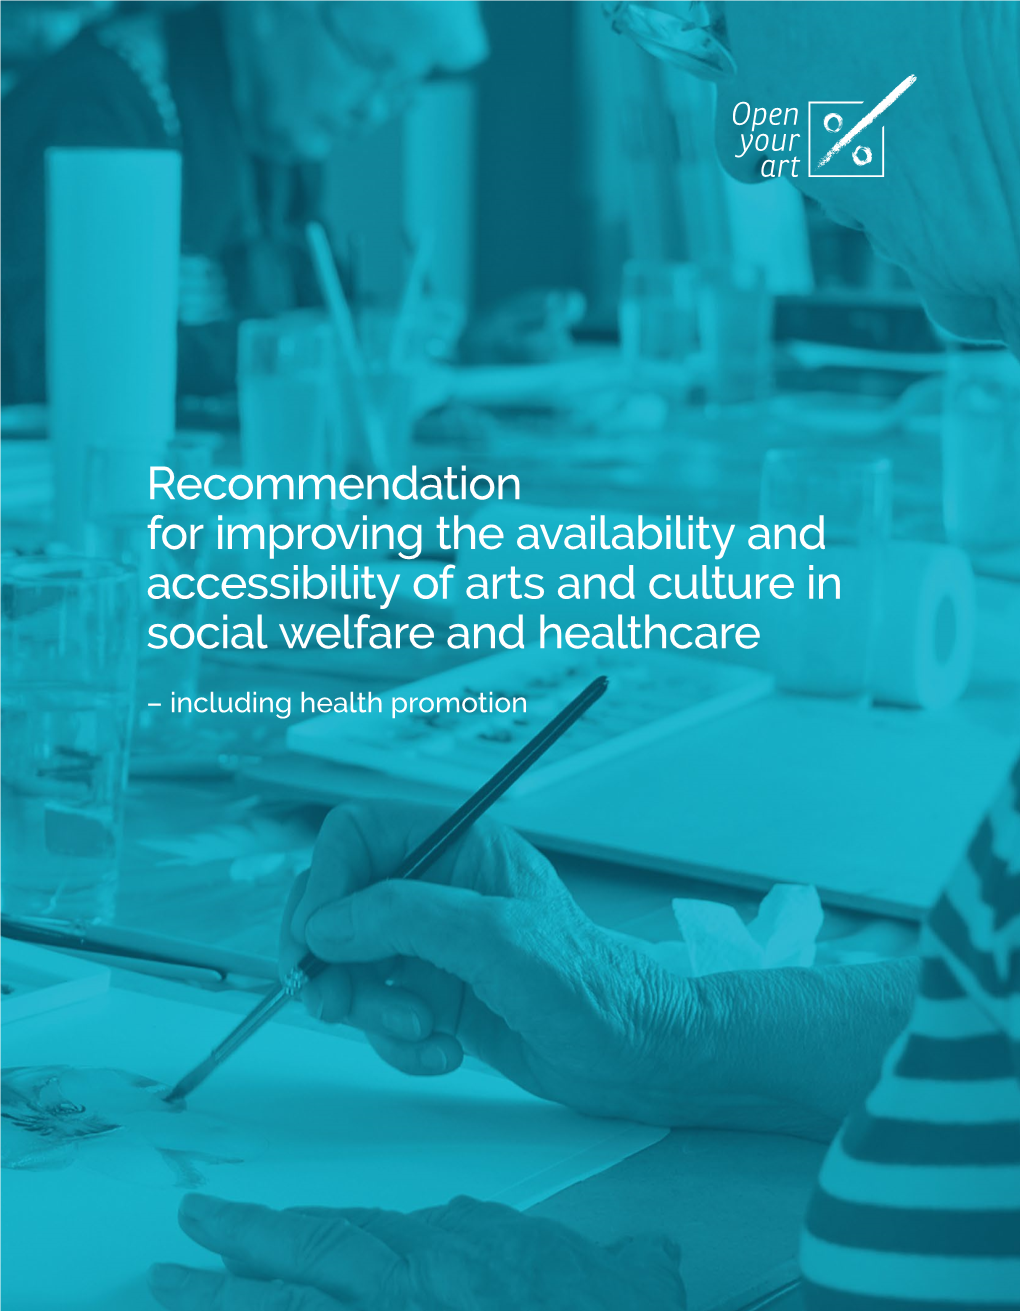 Recommendation for Improving the Availability and Accessibility of Arts and Culture in Social Welfare and Healthcare